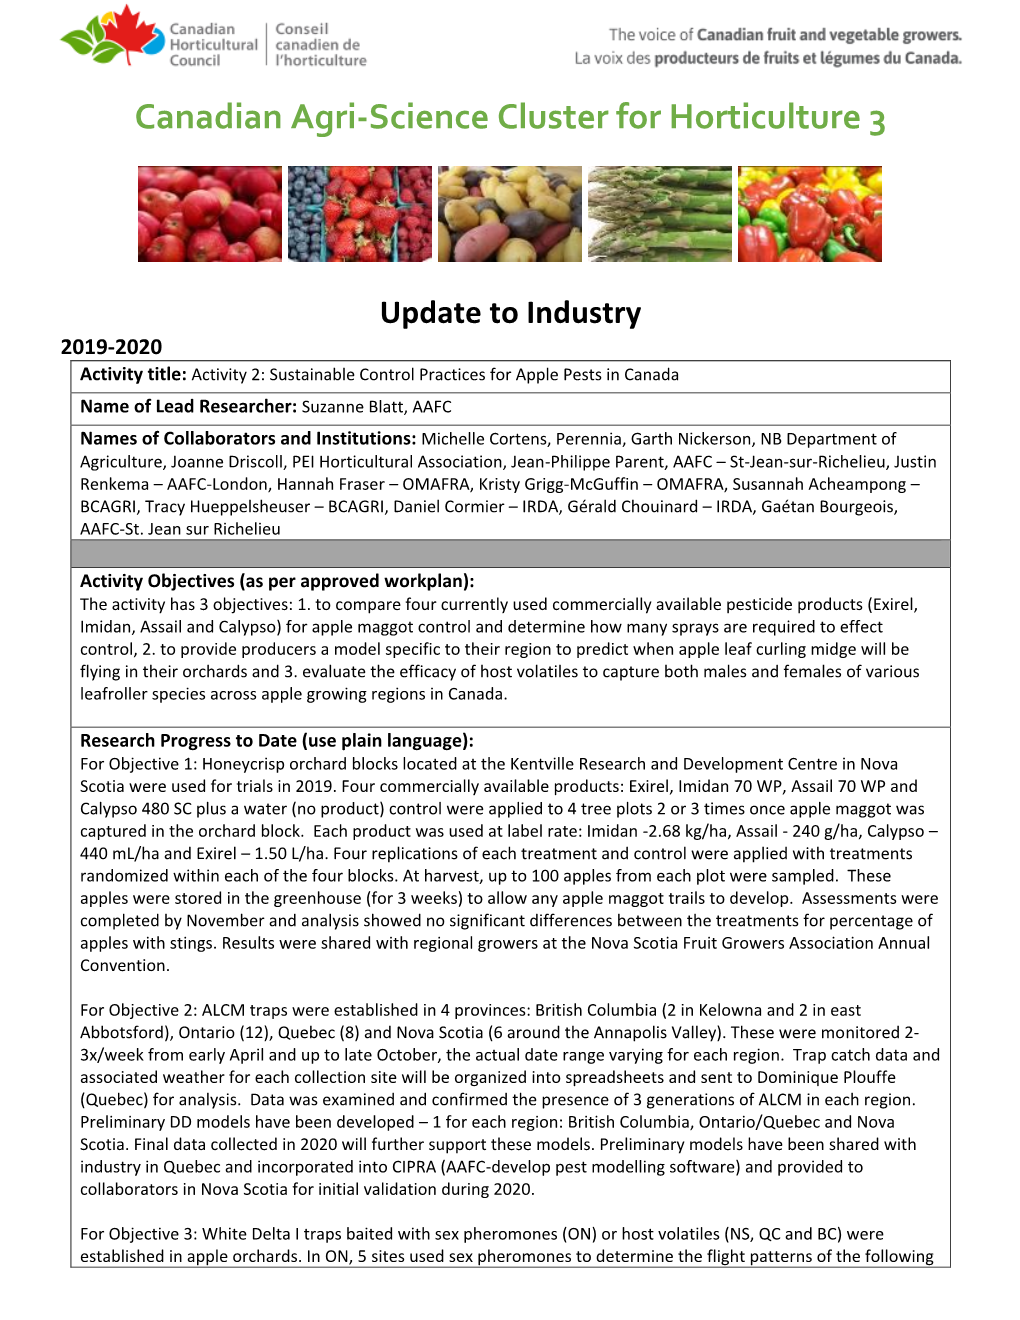 Canadian Agri-Science Cluster for Horticulture 3